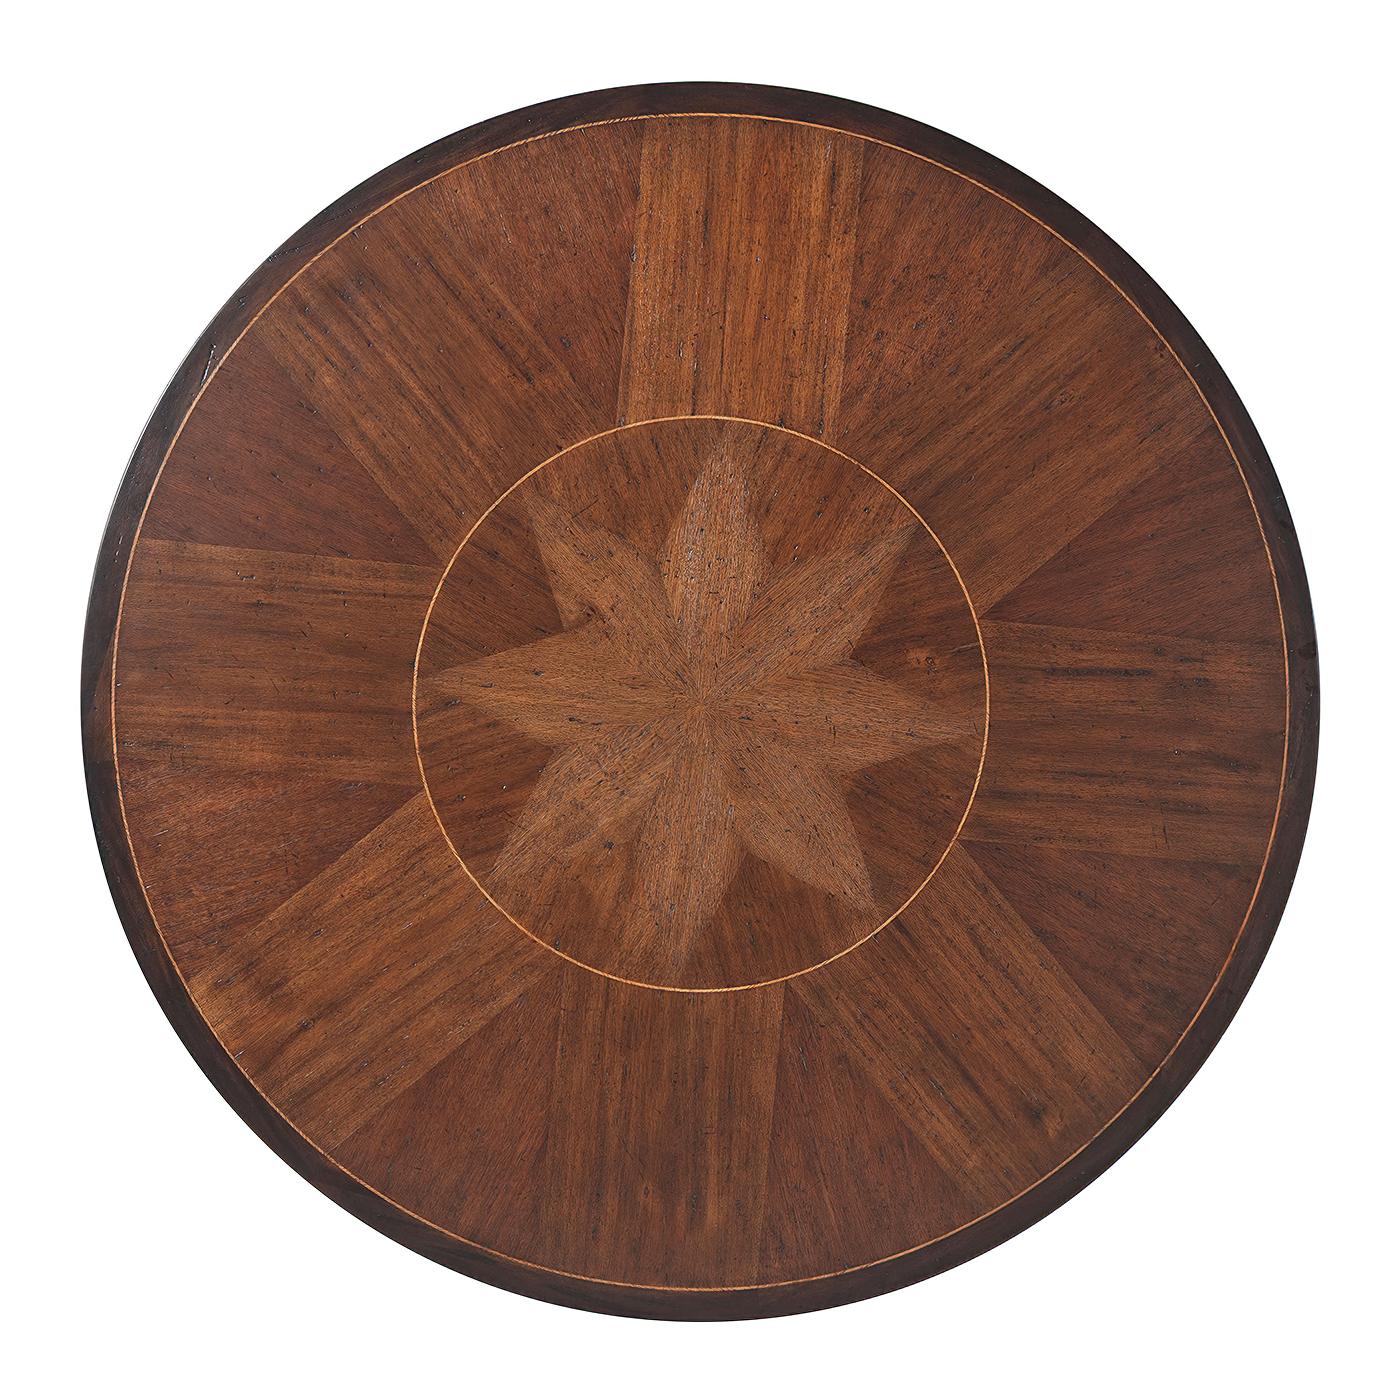 Italian Provincial round dining table with a reeded edge top, mahogany, oak and acacia sunburst parquetry top on a baluster form column pedestal base with outswept legs and accented with roundels.

Dimensions: 48